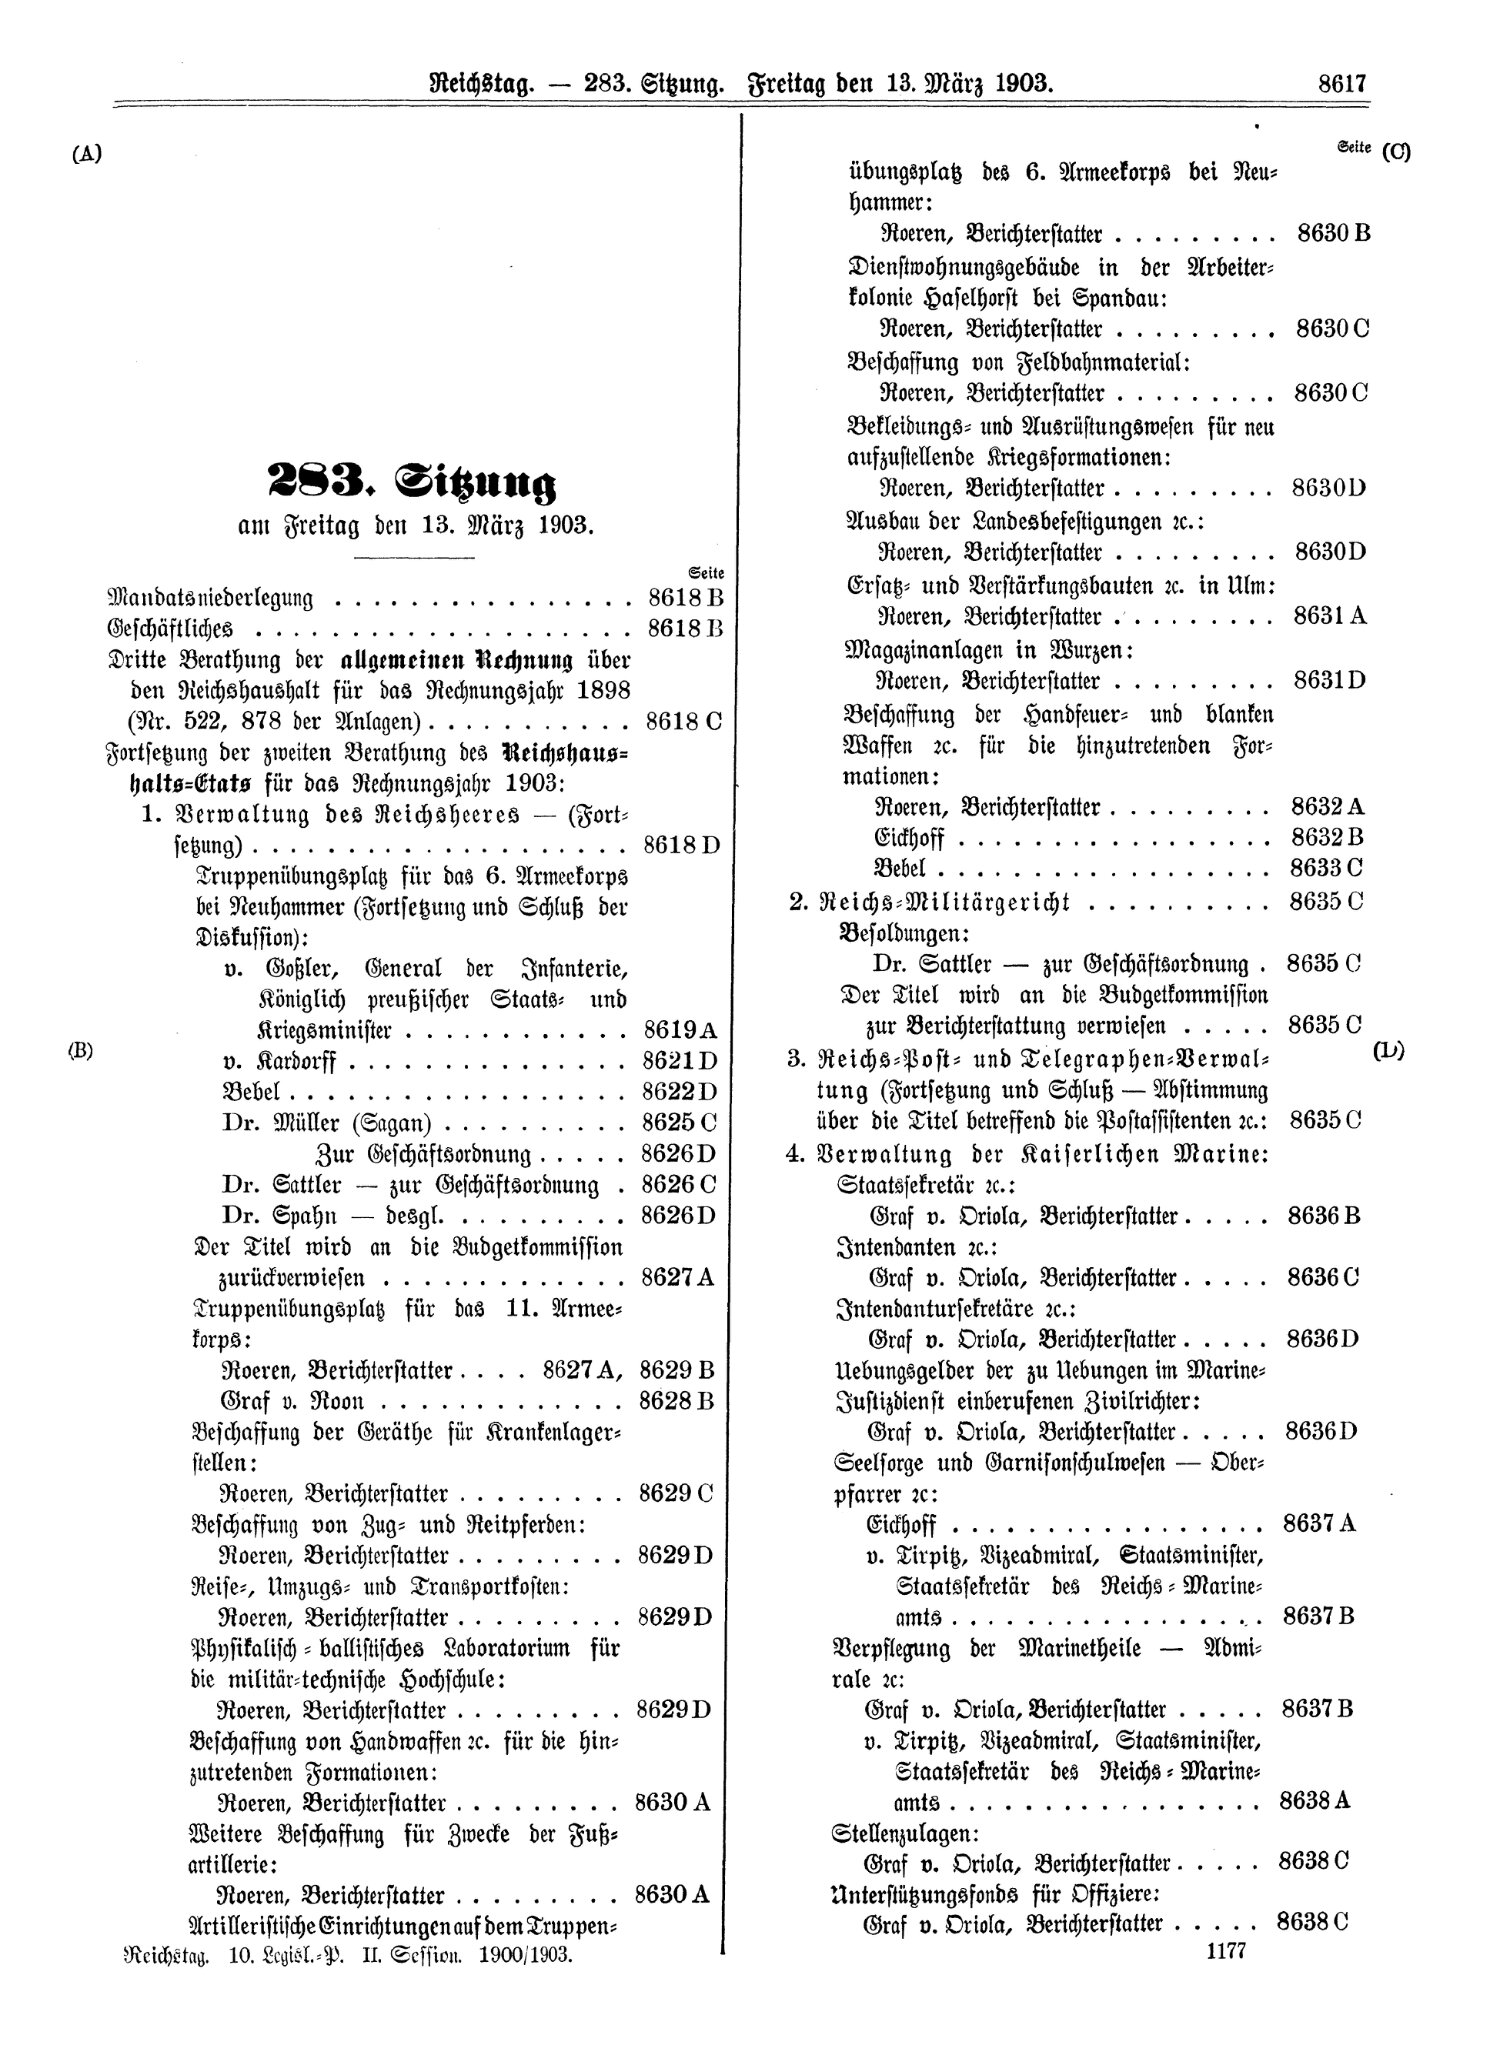 Scan of page 8617